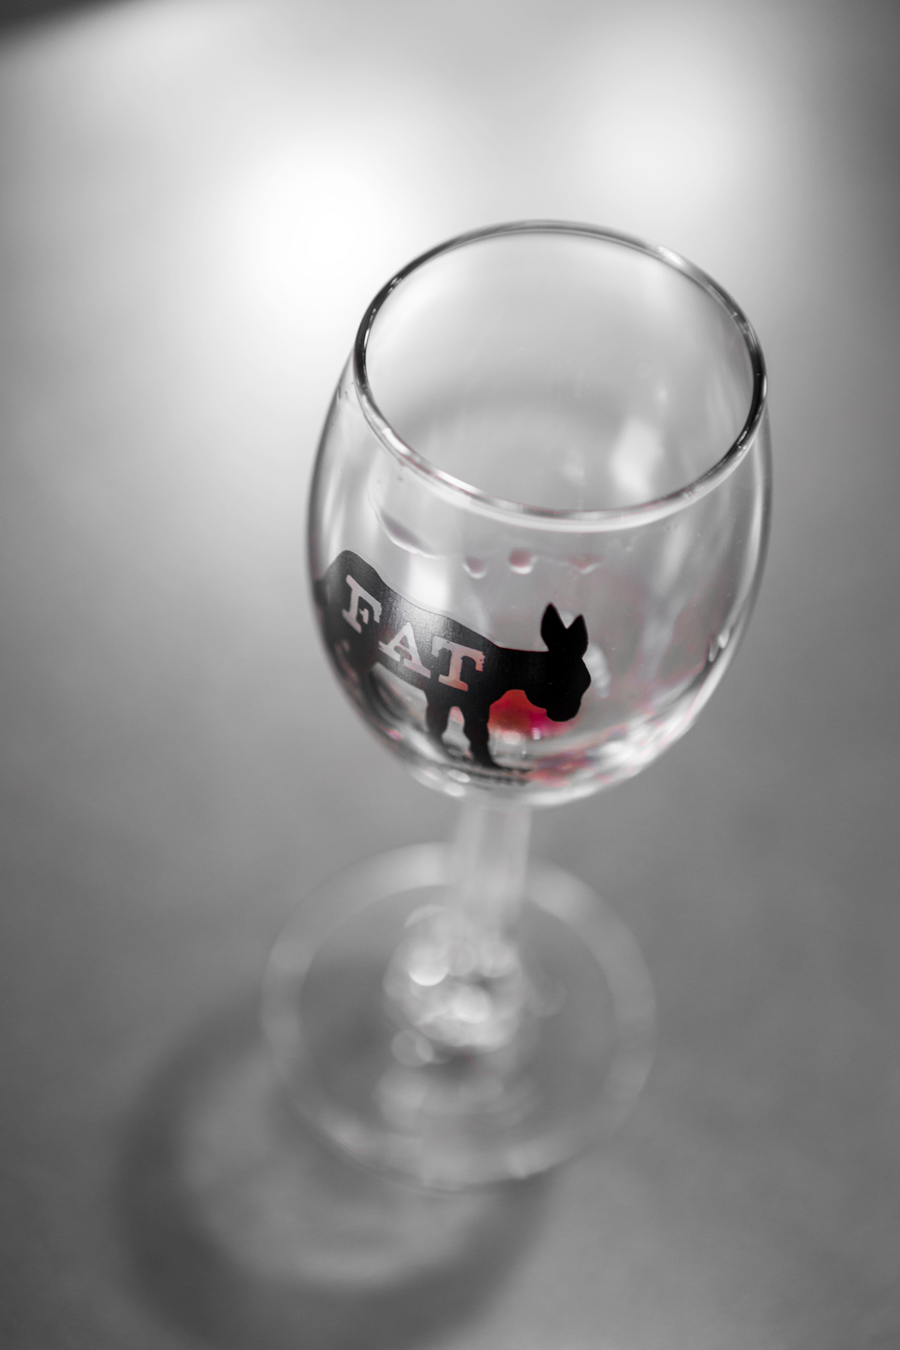 Wine Sippy Cup - black — Fat Ass Ranch & Winery